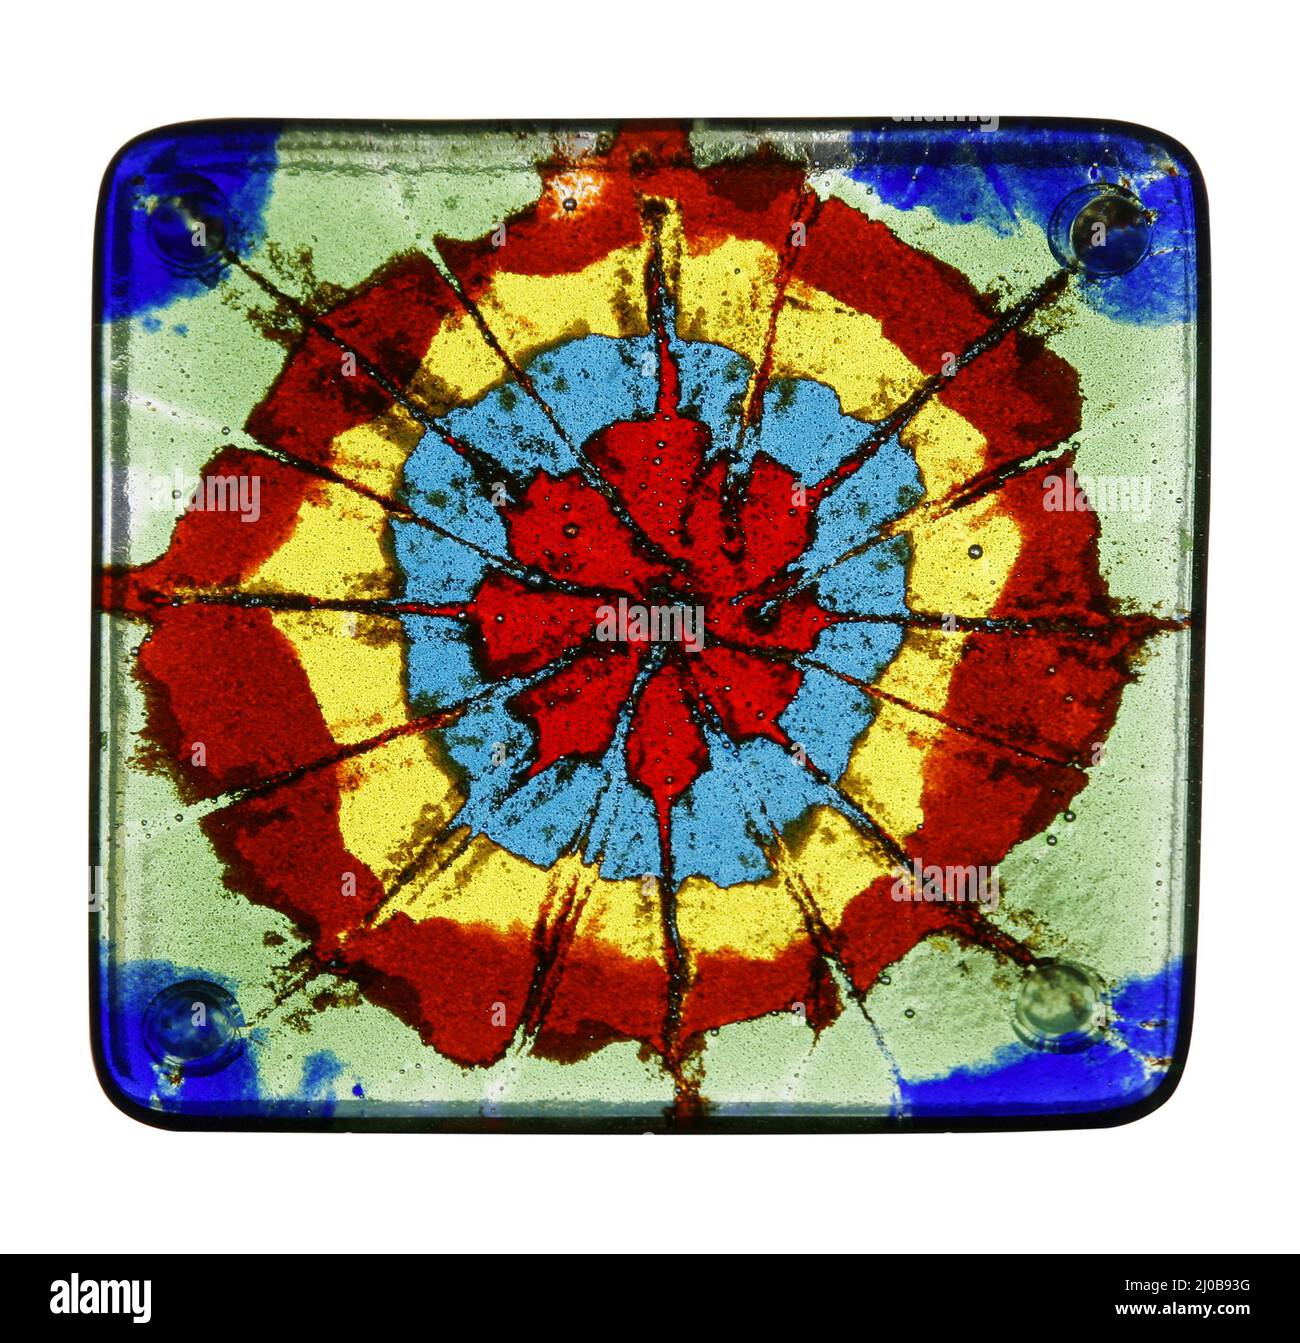 Painted glass tile Stock Photo